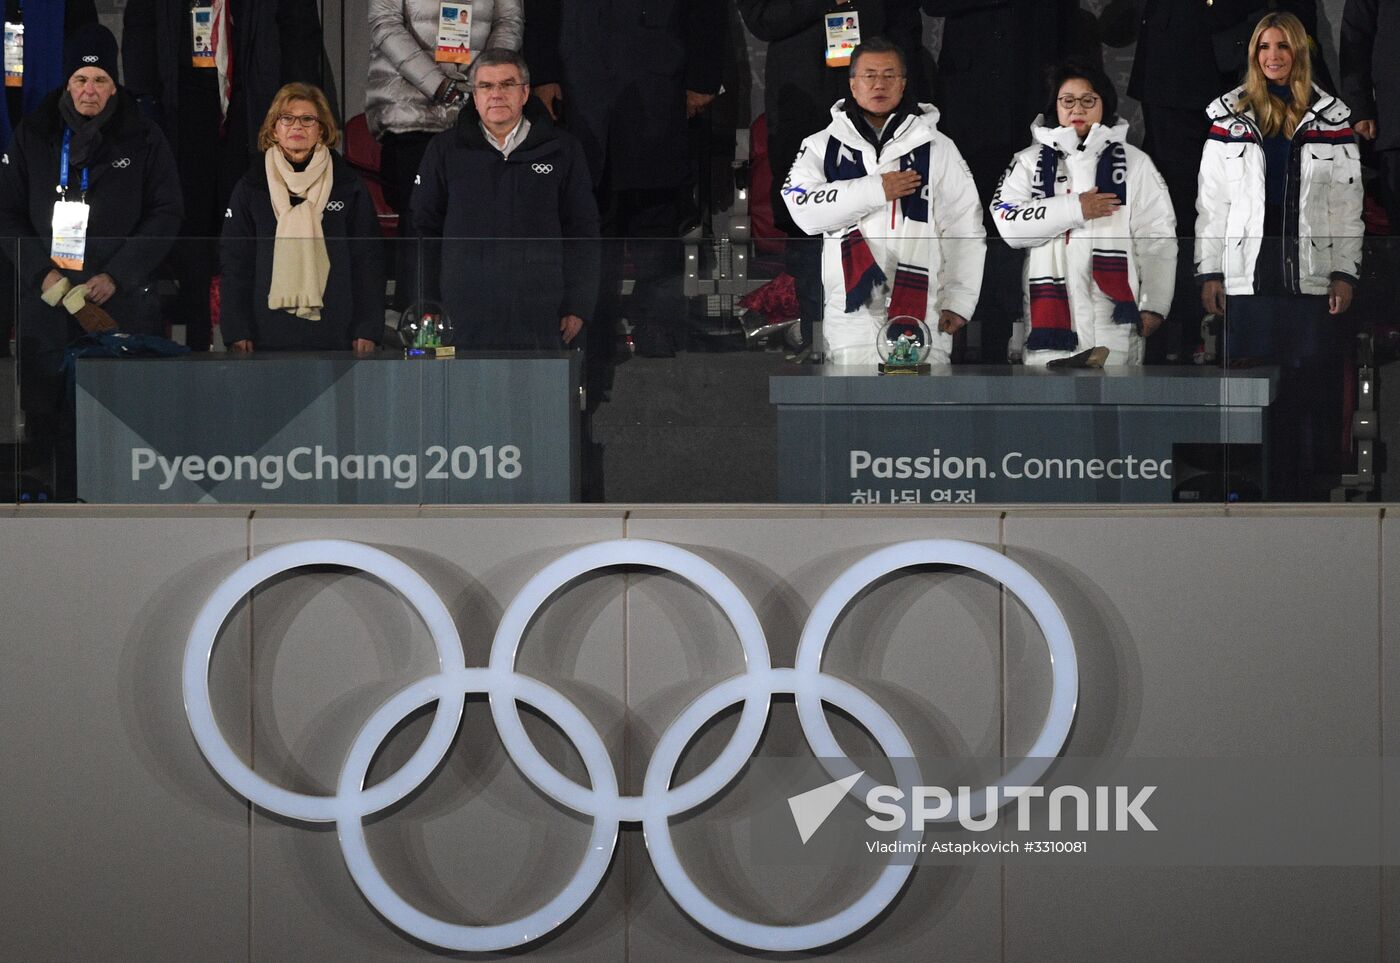 Closing ceremony of the XXIII Olympic Winter Games in Pyeongchang